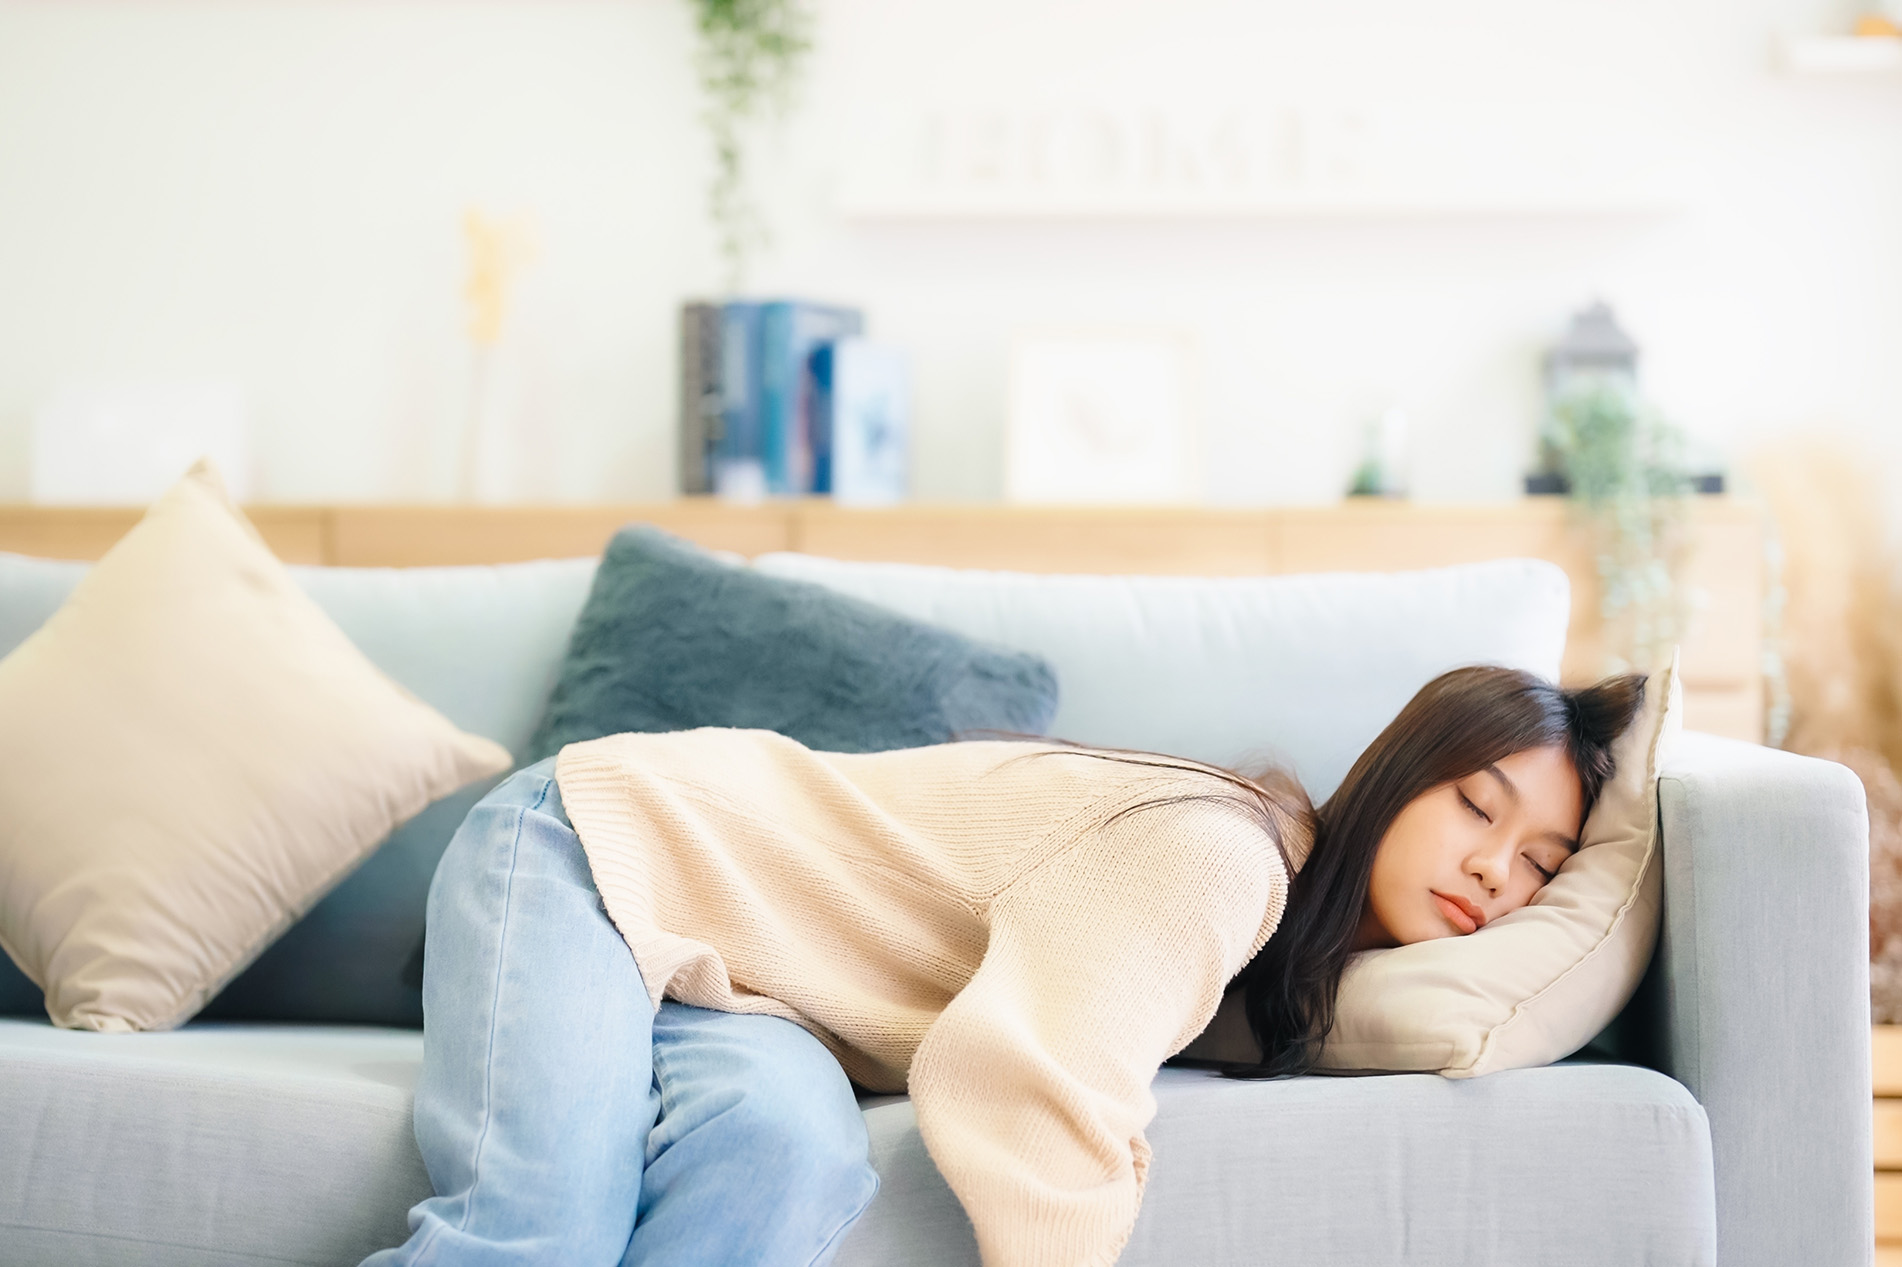 Exhausted young Asian women asleep on couch